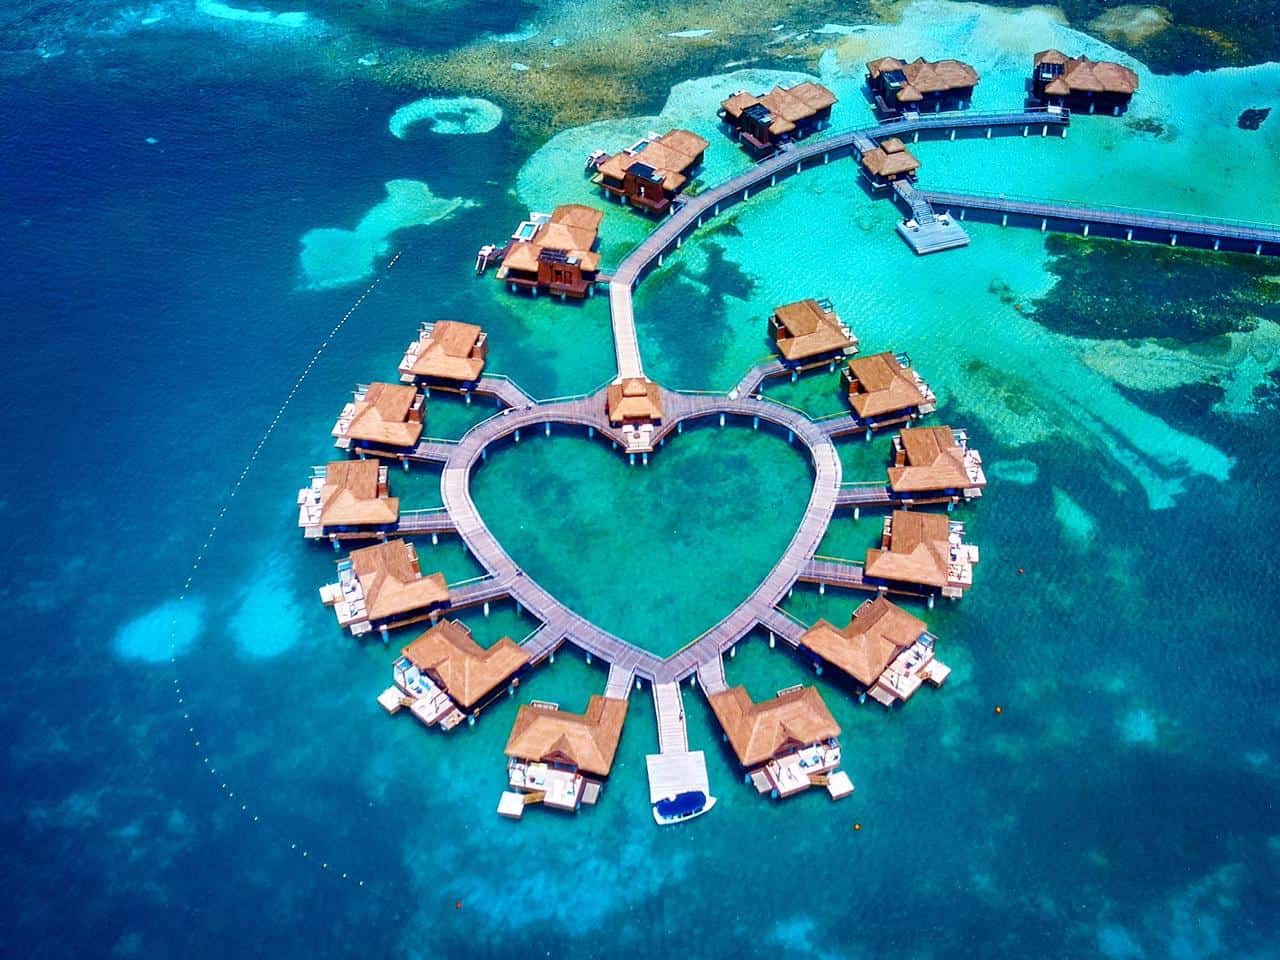 Overwater bungalows drone shot of Sandals Royal Caribbean nearby to Sandals montego bay Jamaica Resort